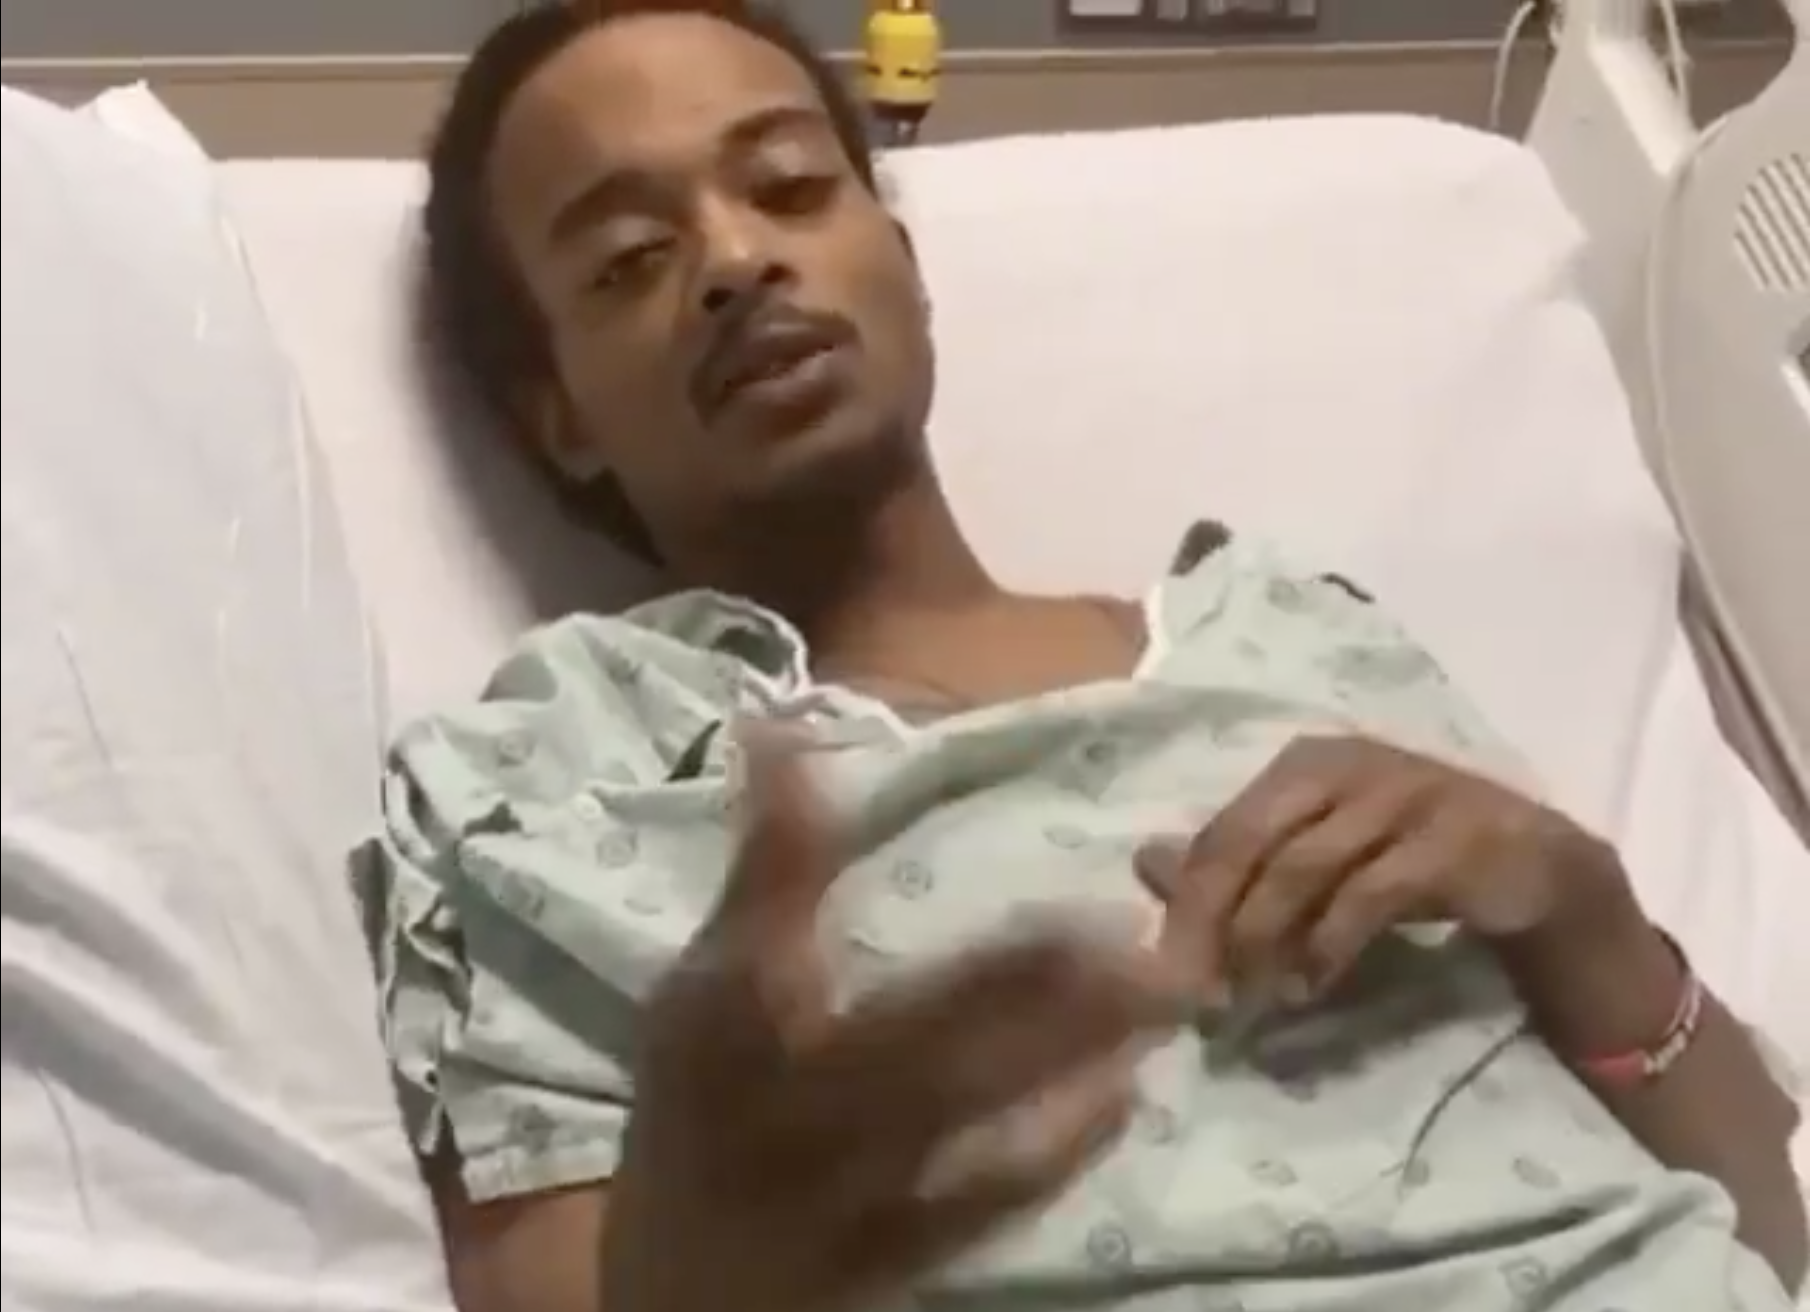 Jacob Blake, in a green hospital gown, lies in his bed, an arm extended as he gestures, speaking.